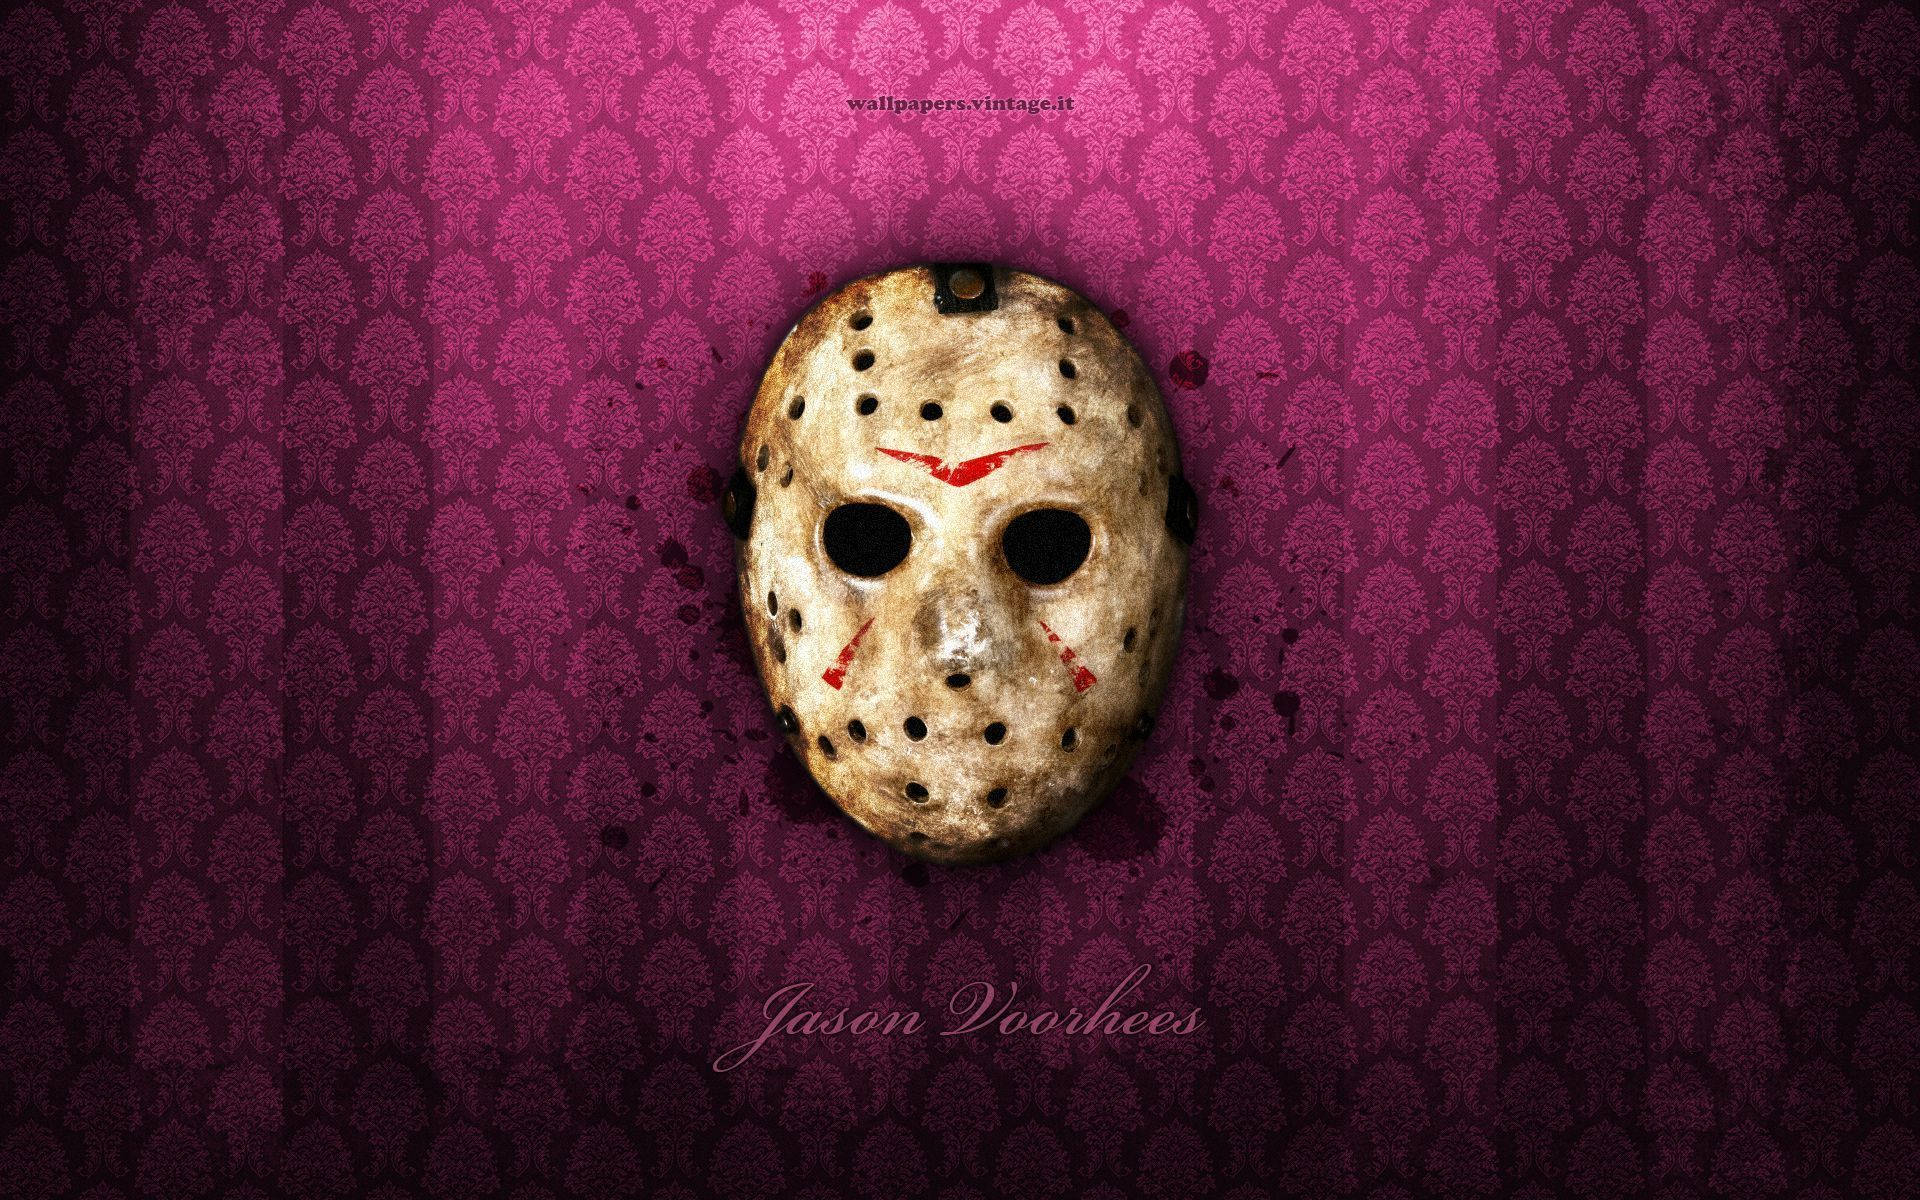 1920X1200 Friday The 13th Wallpaper and Background